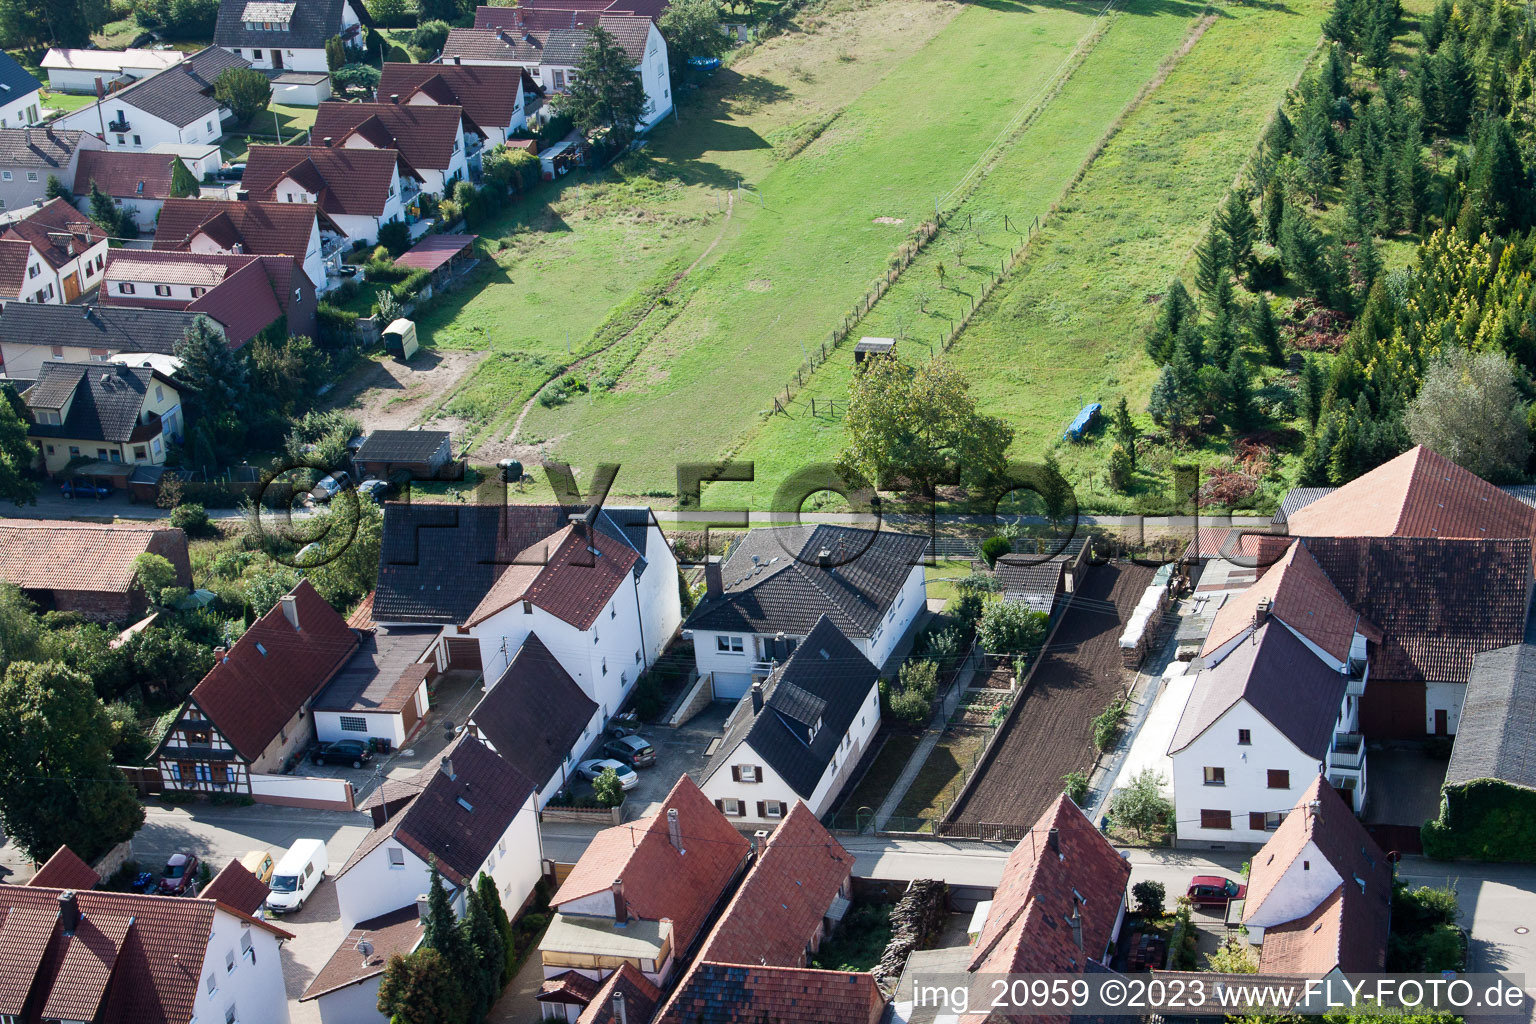 At the kiln in Freckenfeld in the state Rhineland-Palatinate, Germany seen from above